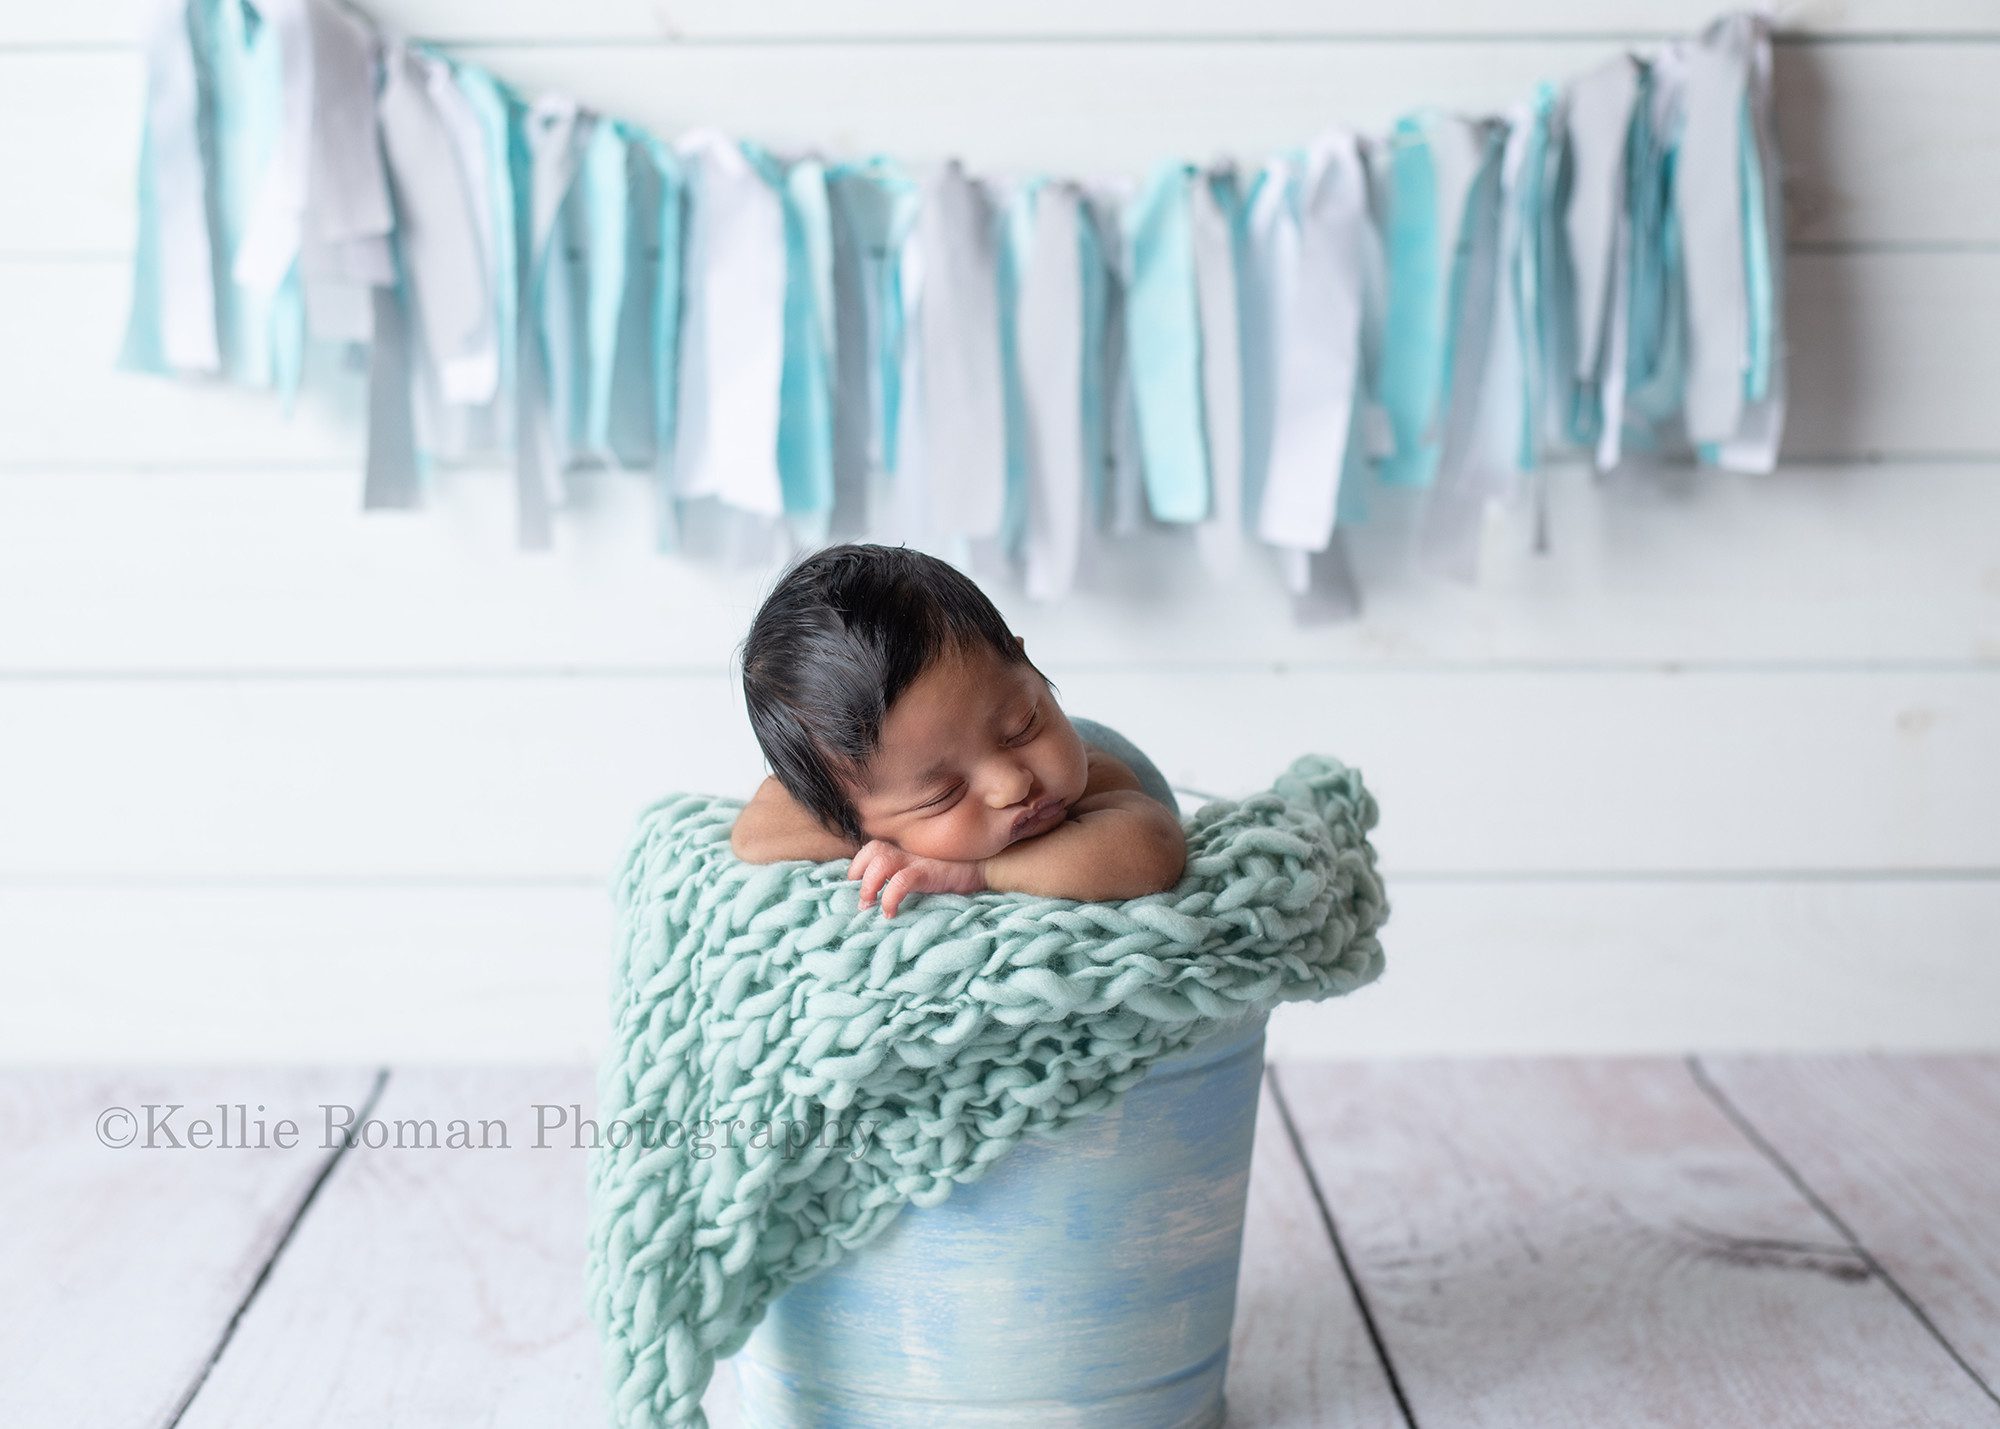 sweet baby boy a baby boy in a milwaukee photography studio. The baby boy has lots of dark hair and is proped upright in a blue metal bucket with teal blanket the babies chin is resting on his arms. There is a white wood wall behind him with a blue fabric banner.